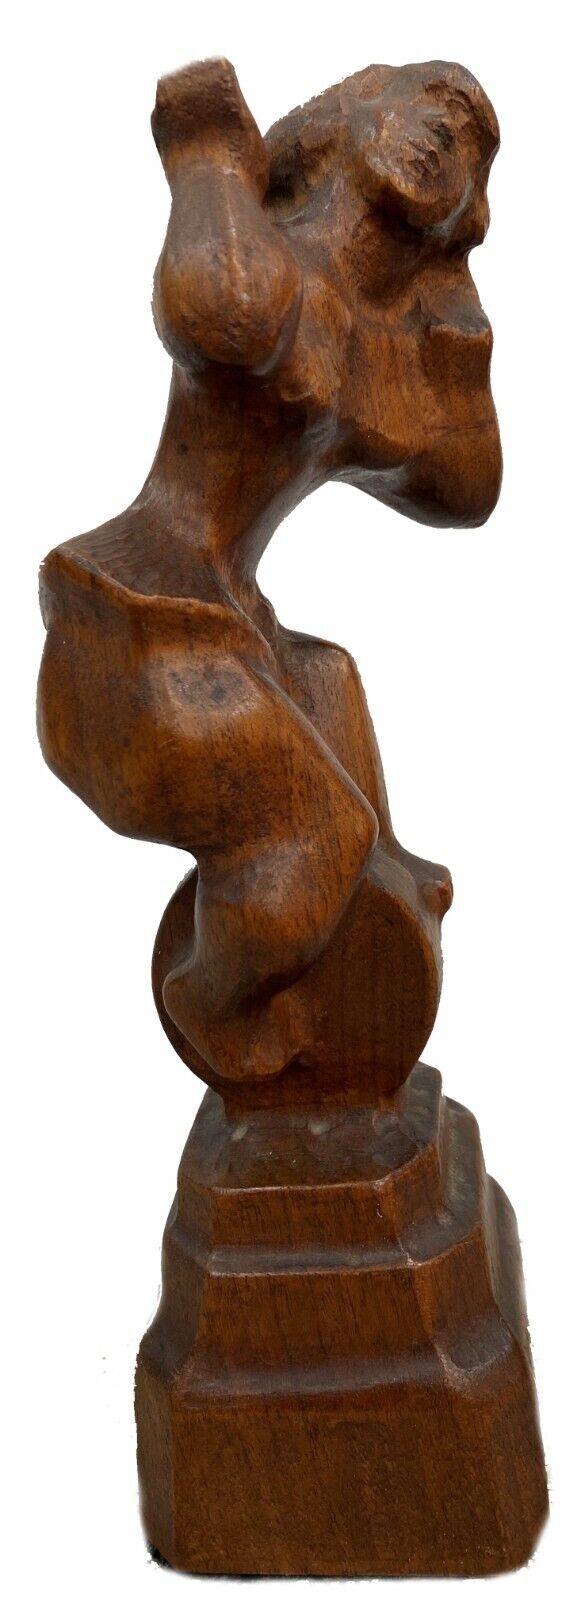 Chaim Gross, Ballerina on Unicycle, Hand-Carved Wood Sculpture, Ca. 1940s